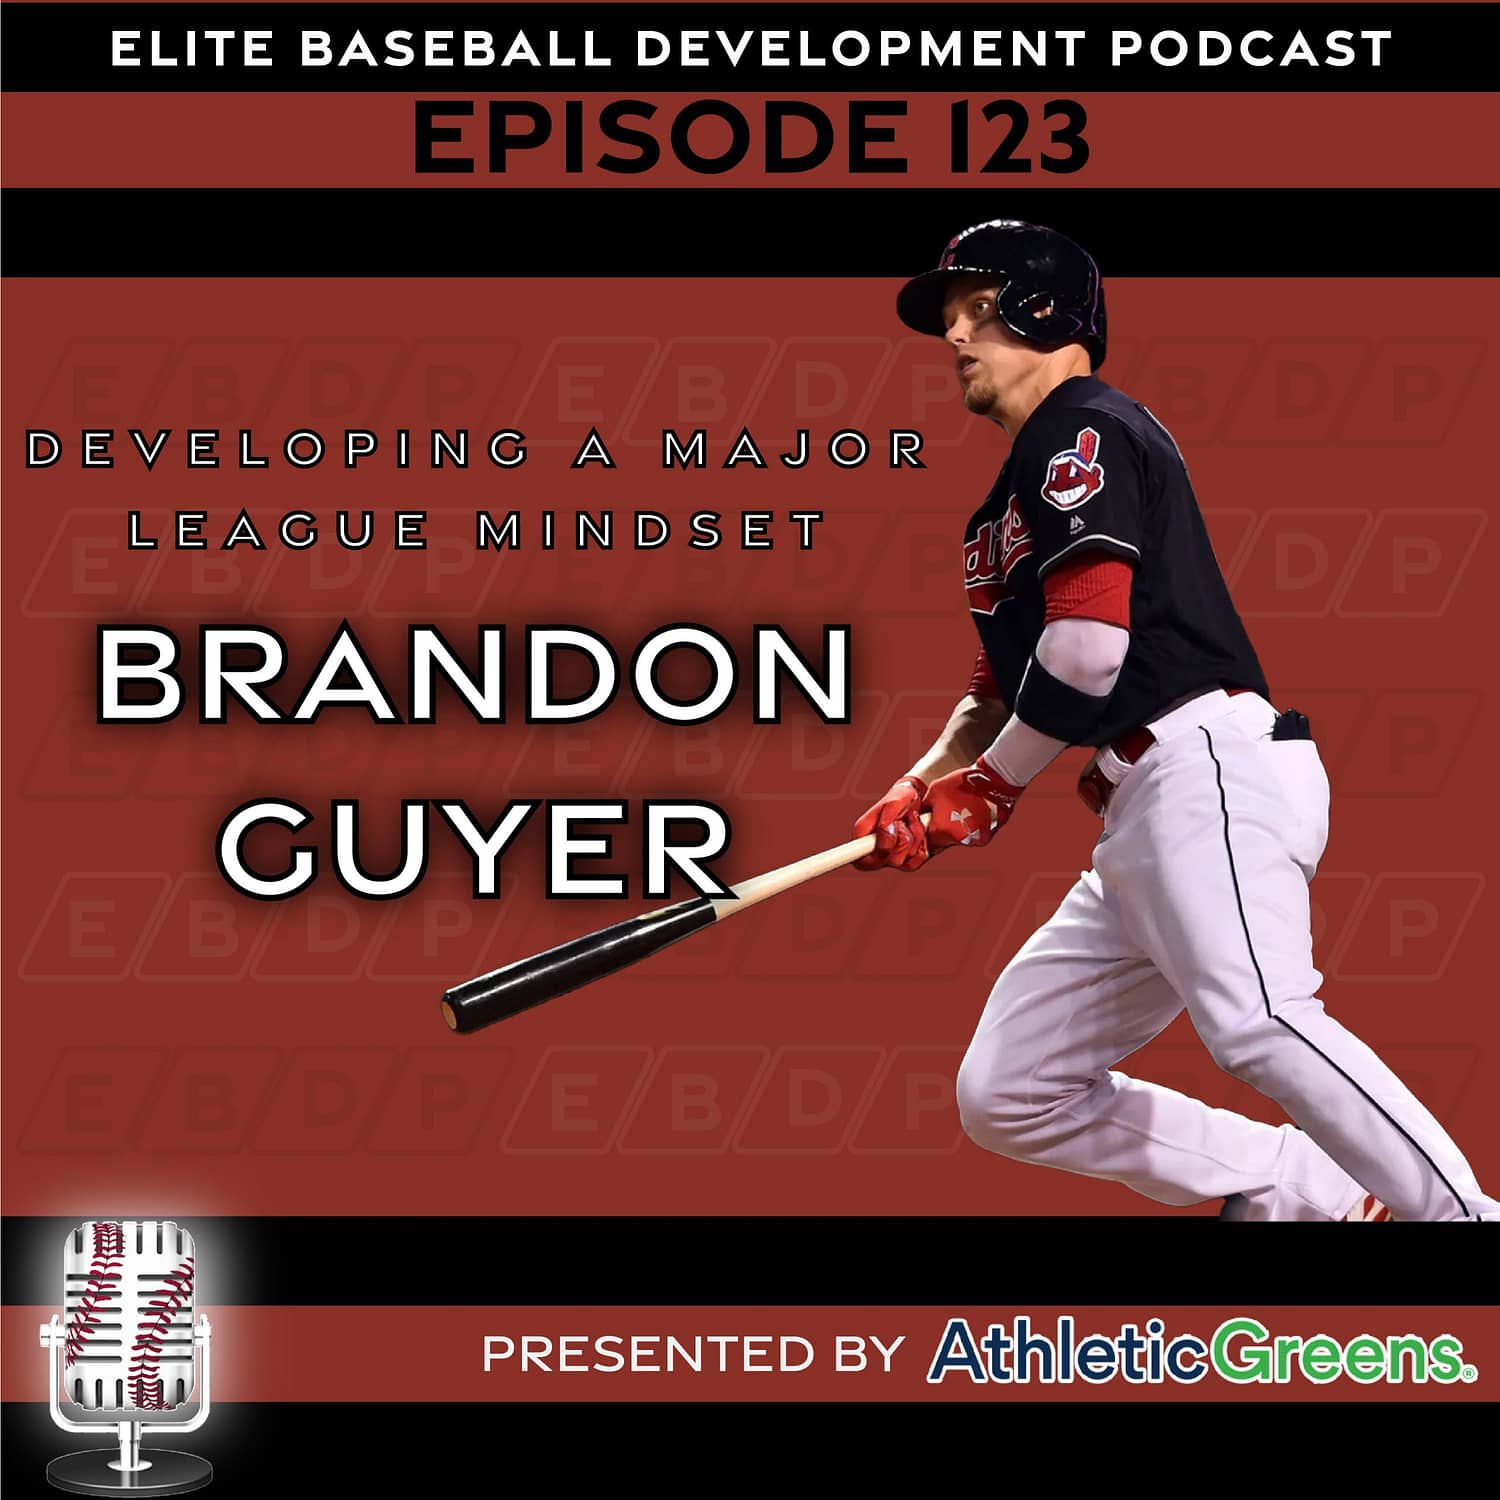 Developing a Major League Mindset with Brandon Guyer